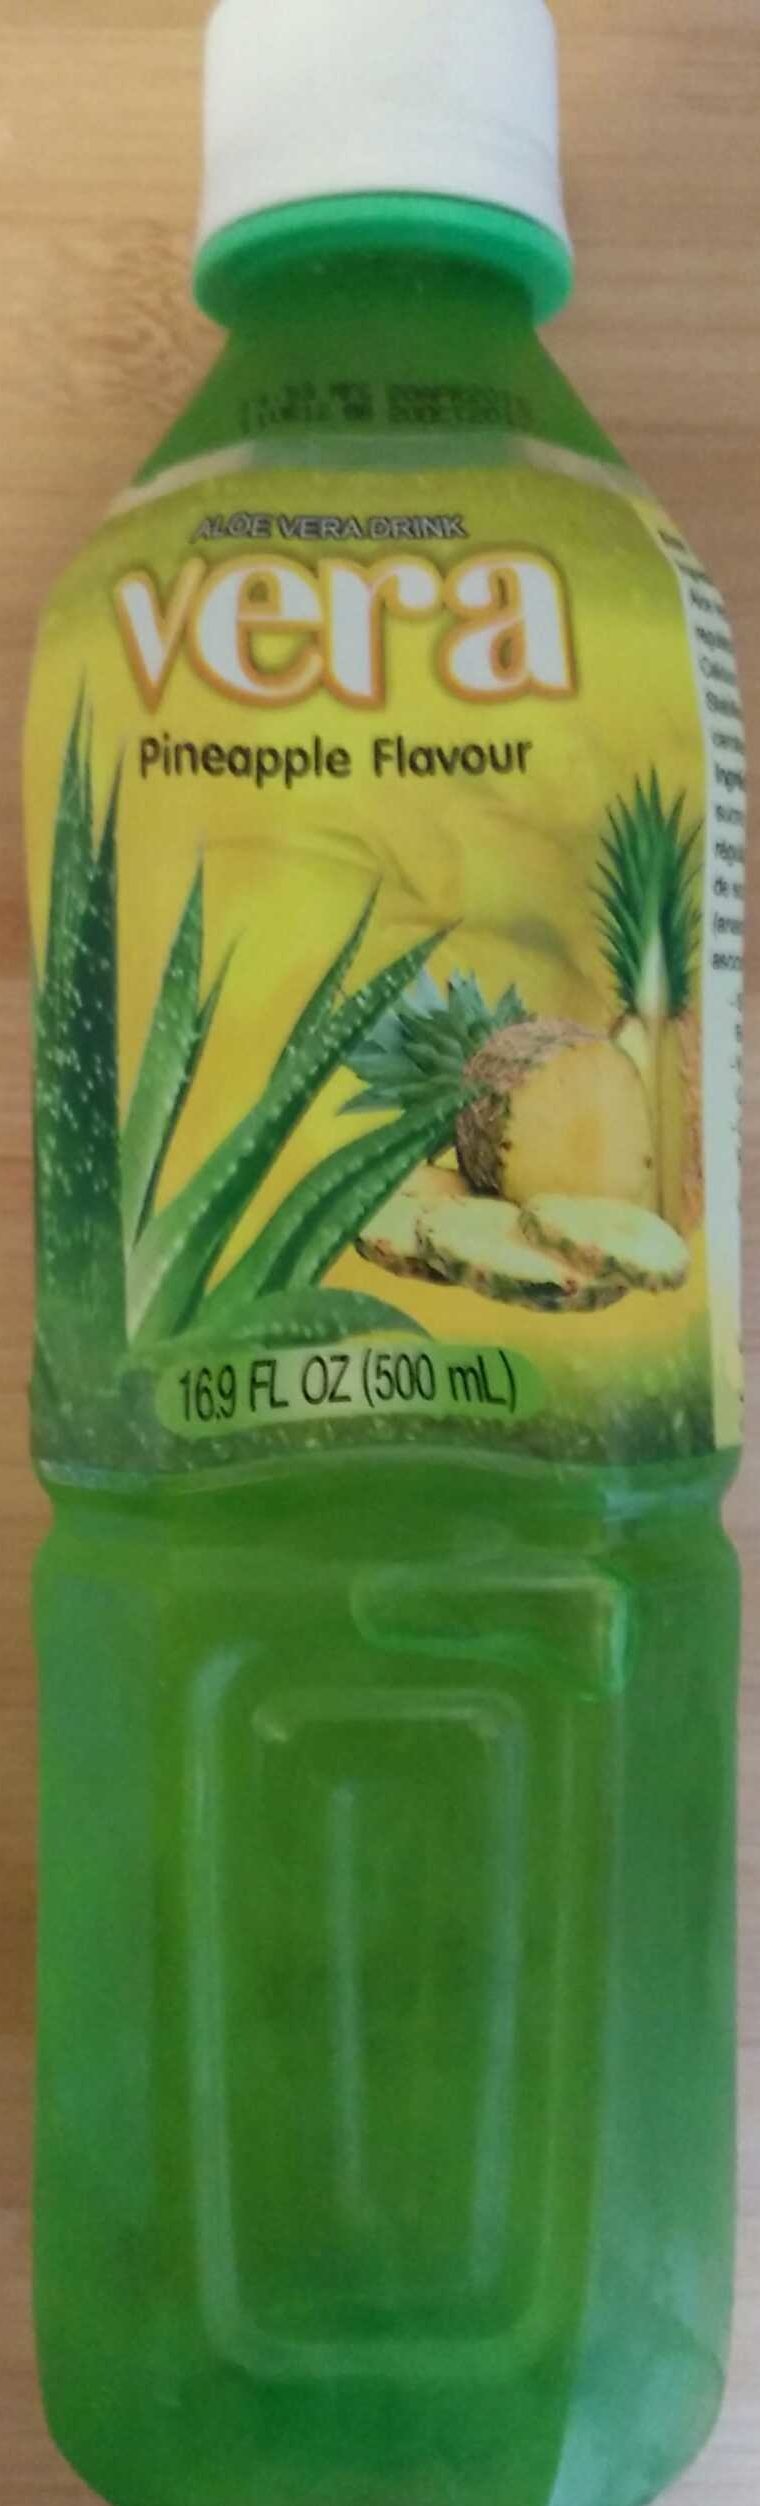 Aloe vera drink pineapple flavour - Product - fr